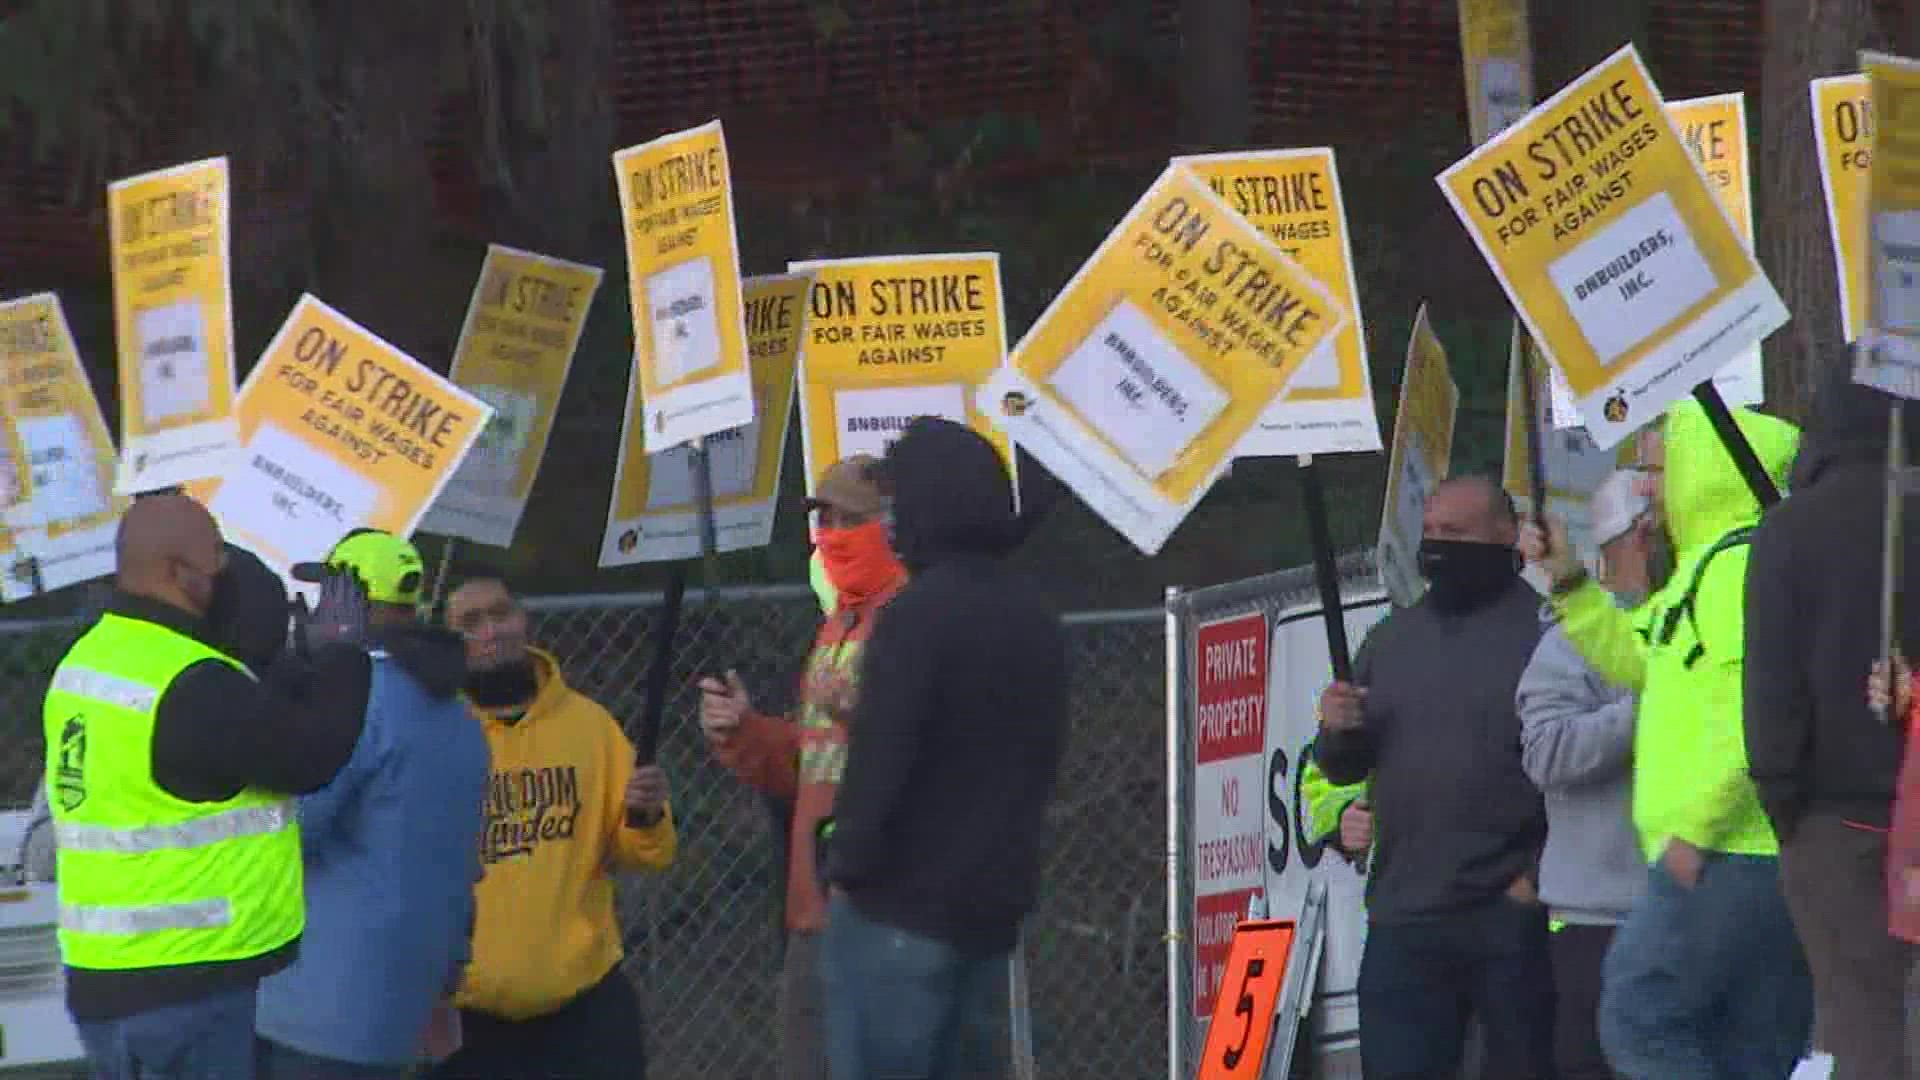 The Northwest Carpenter's Union rejected a fourth offer to increase wages and now construction workers are on strike.